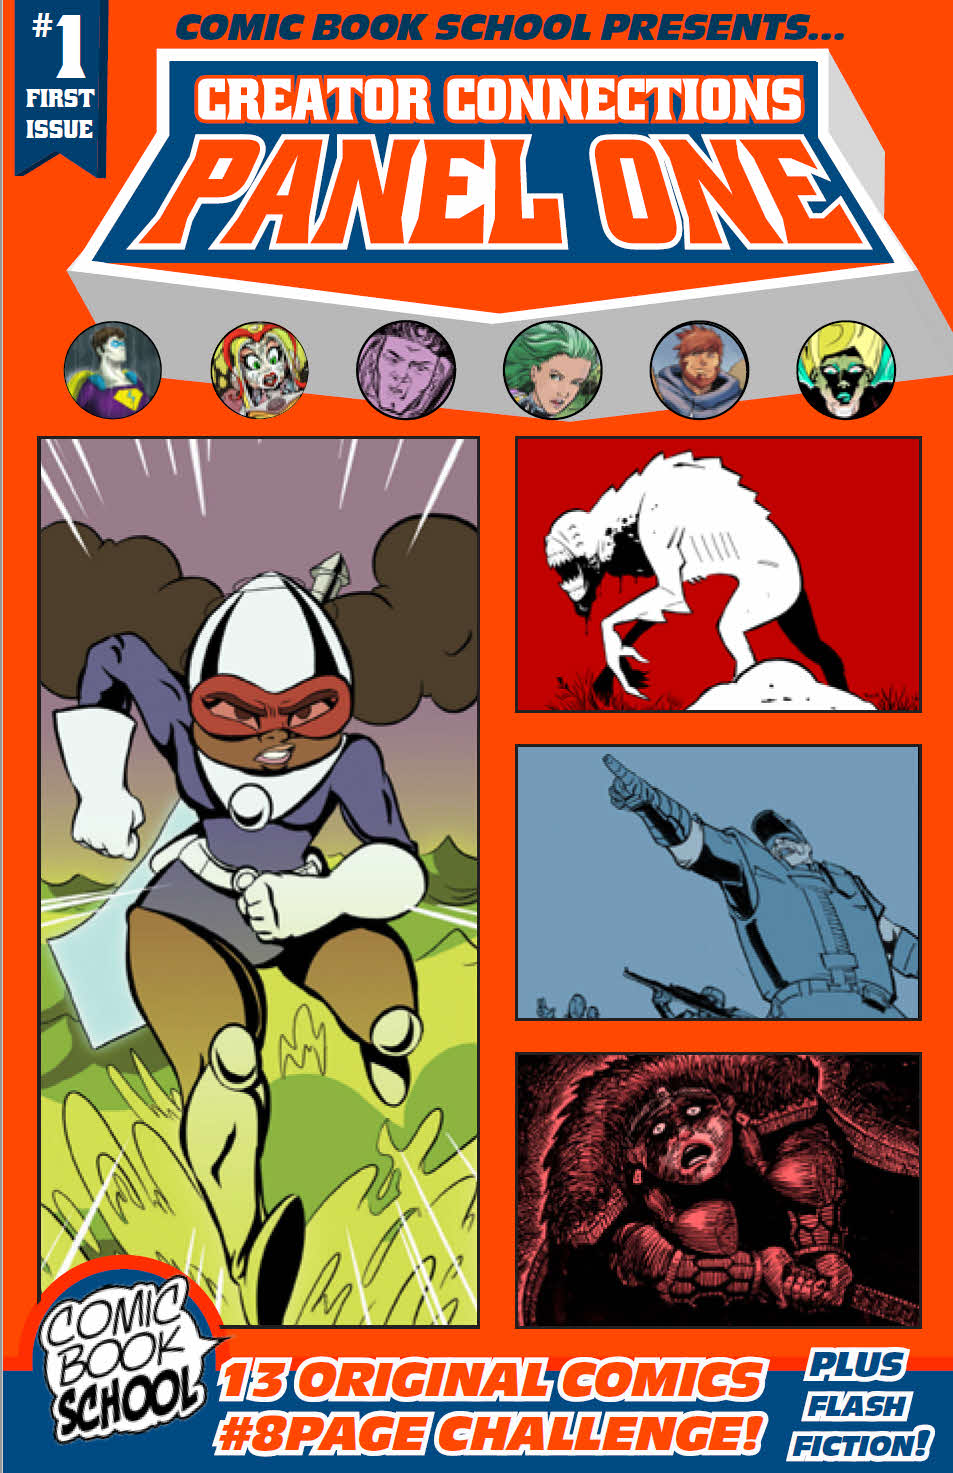 Cover to the Creator Connections: Panel One anthology